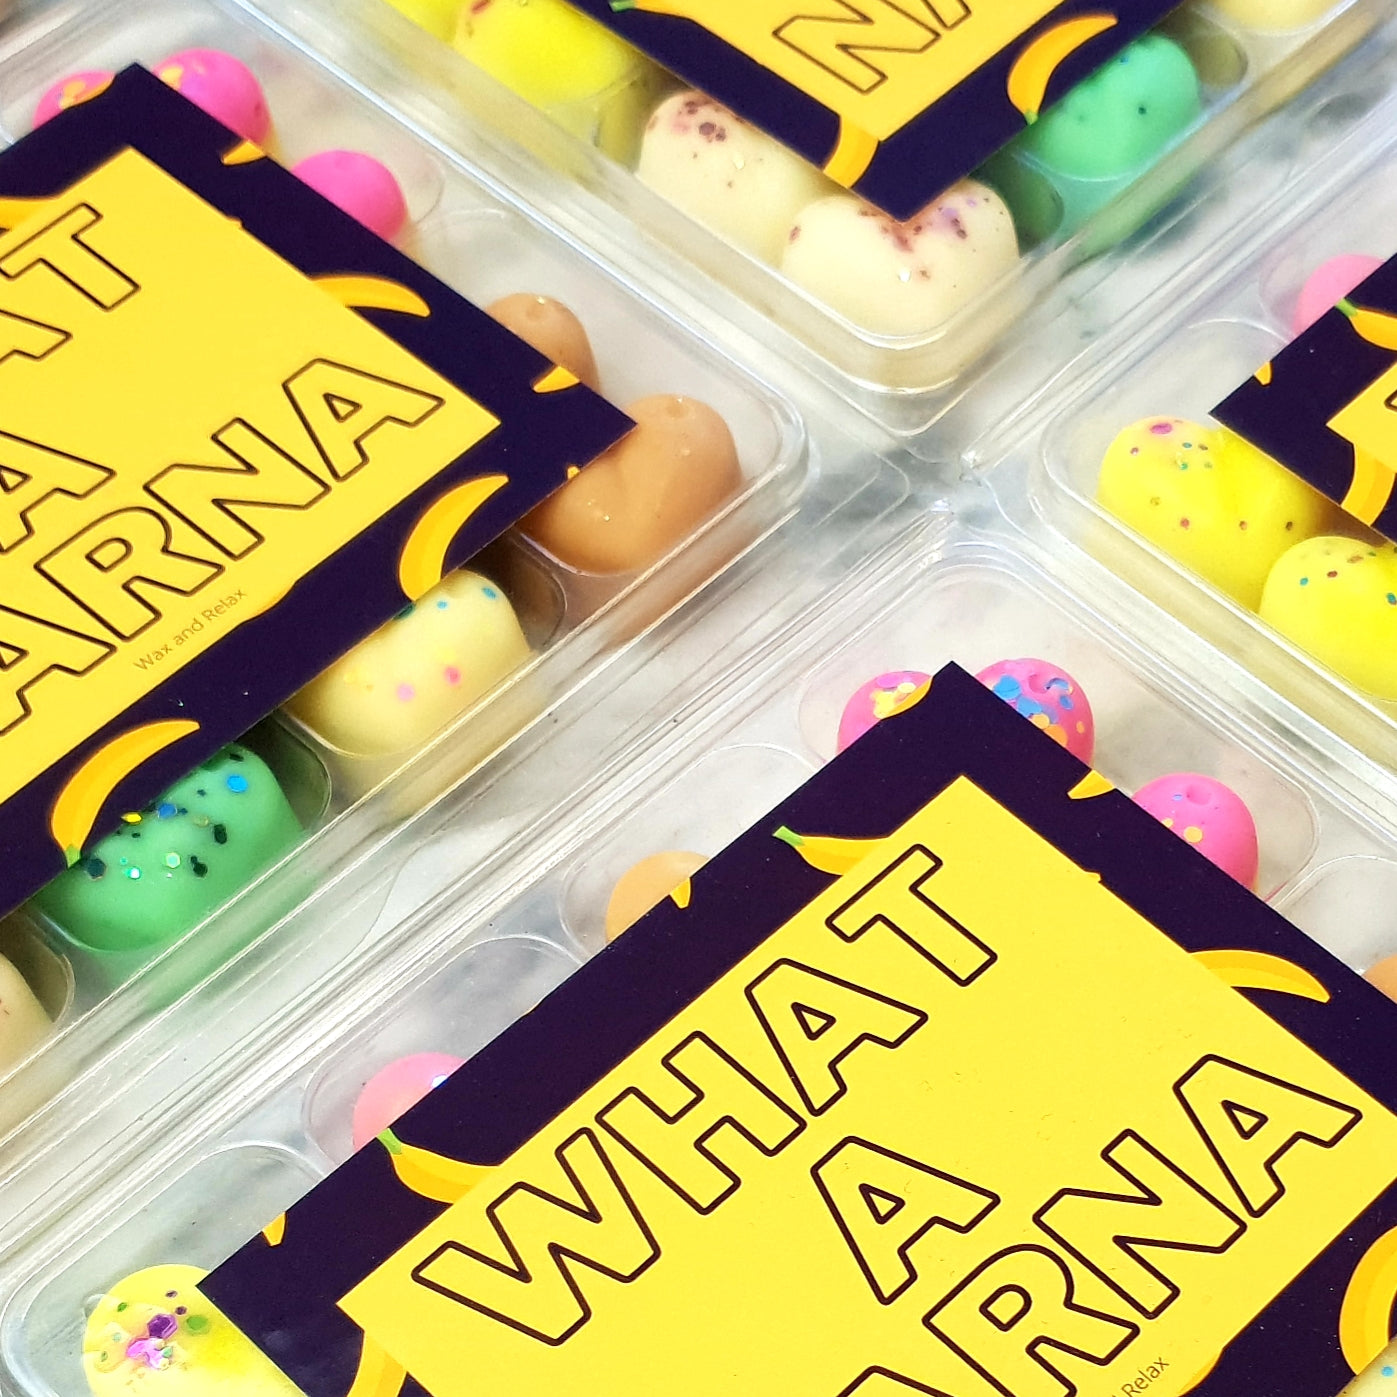 What a Narna Wax Melt Collection